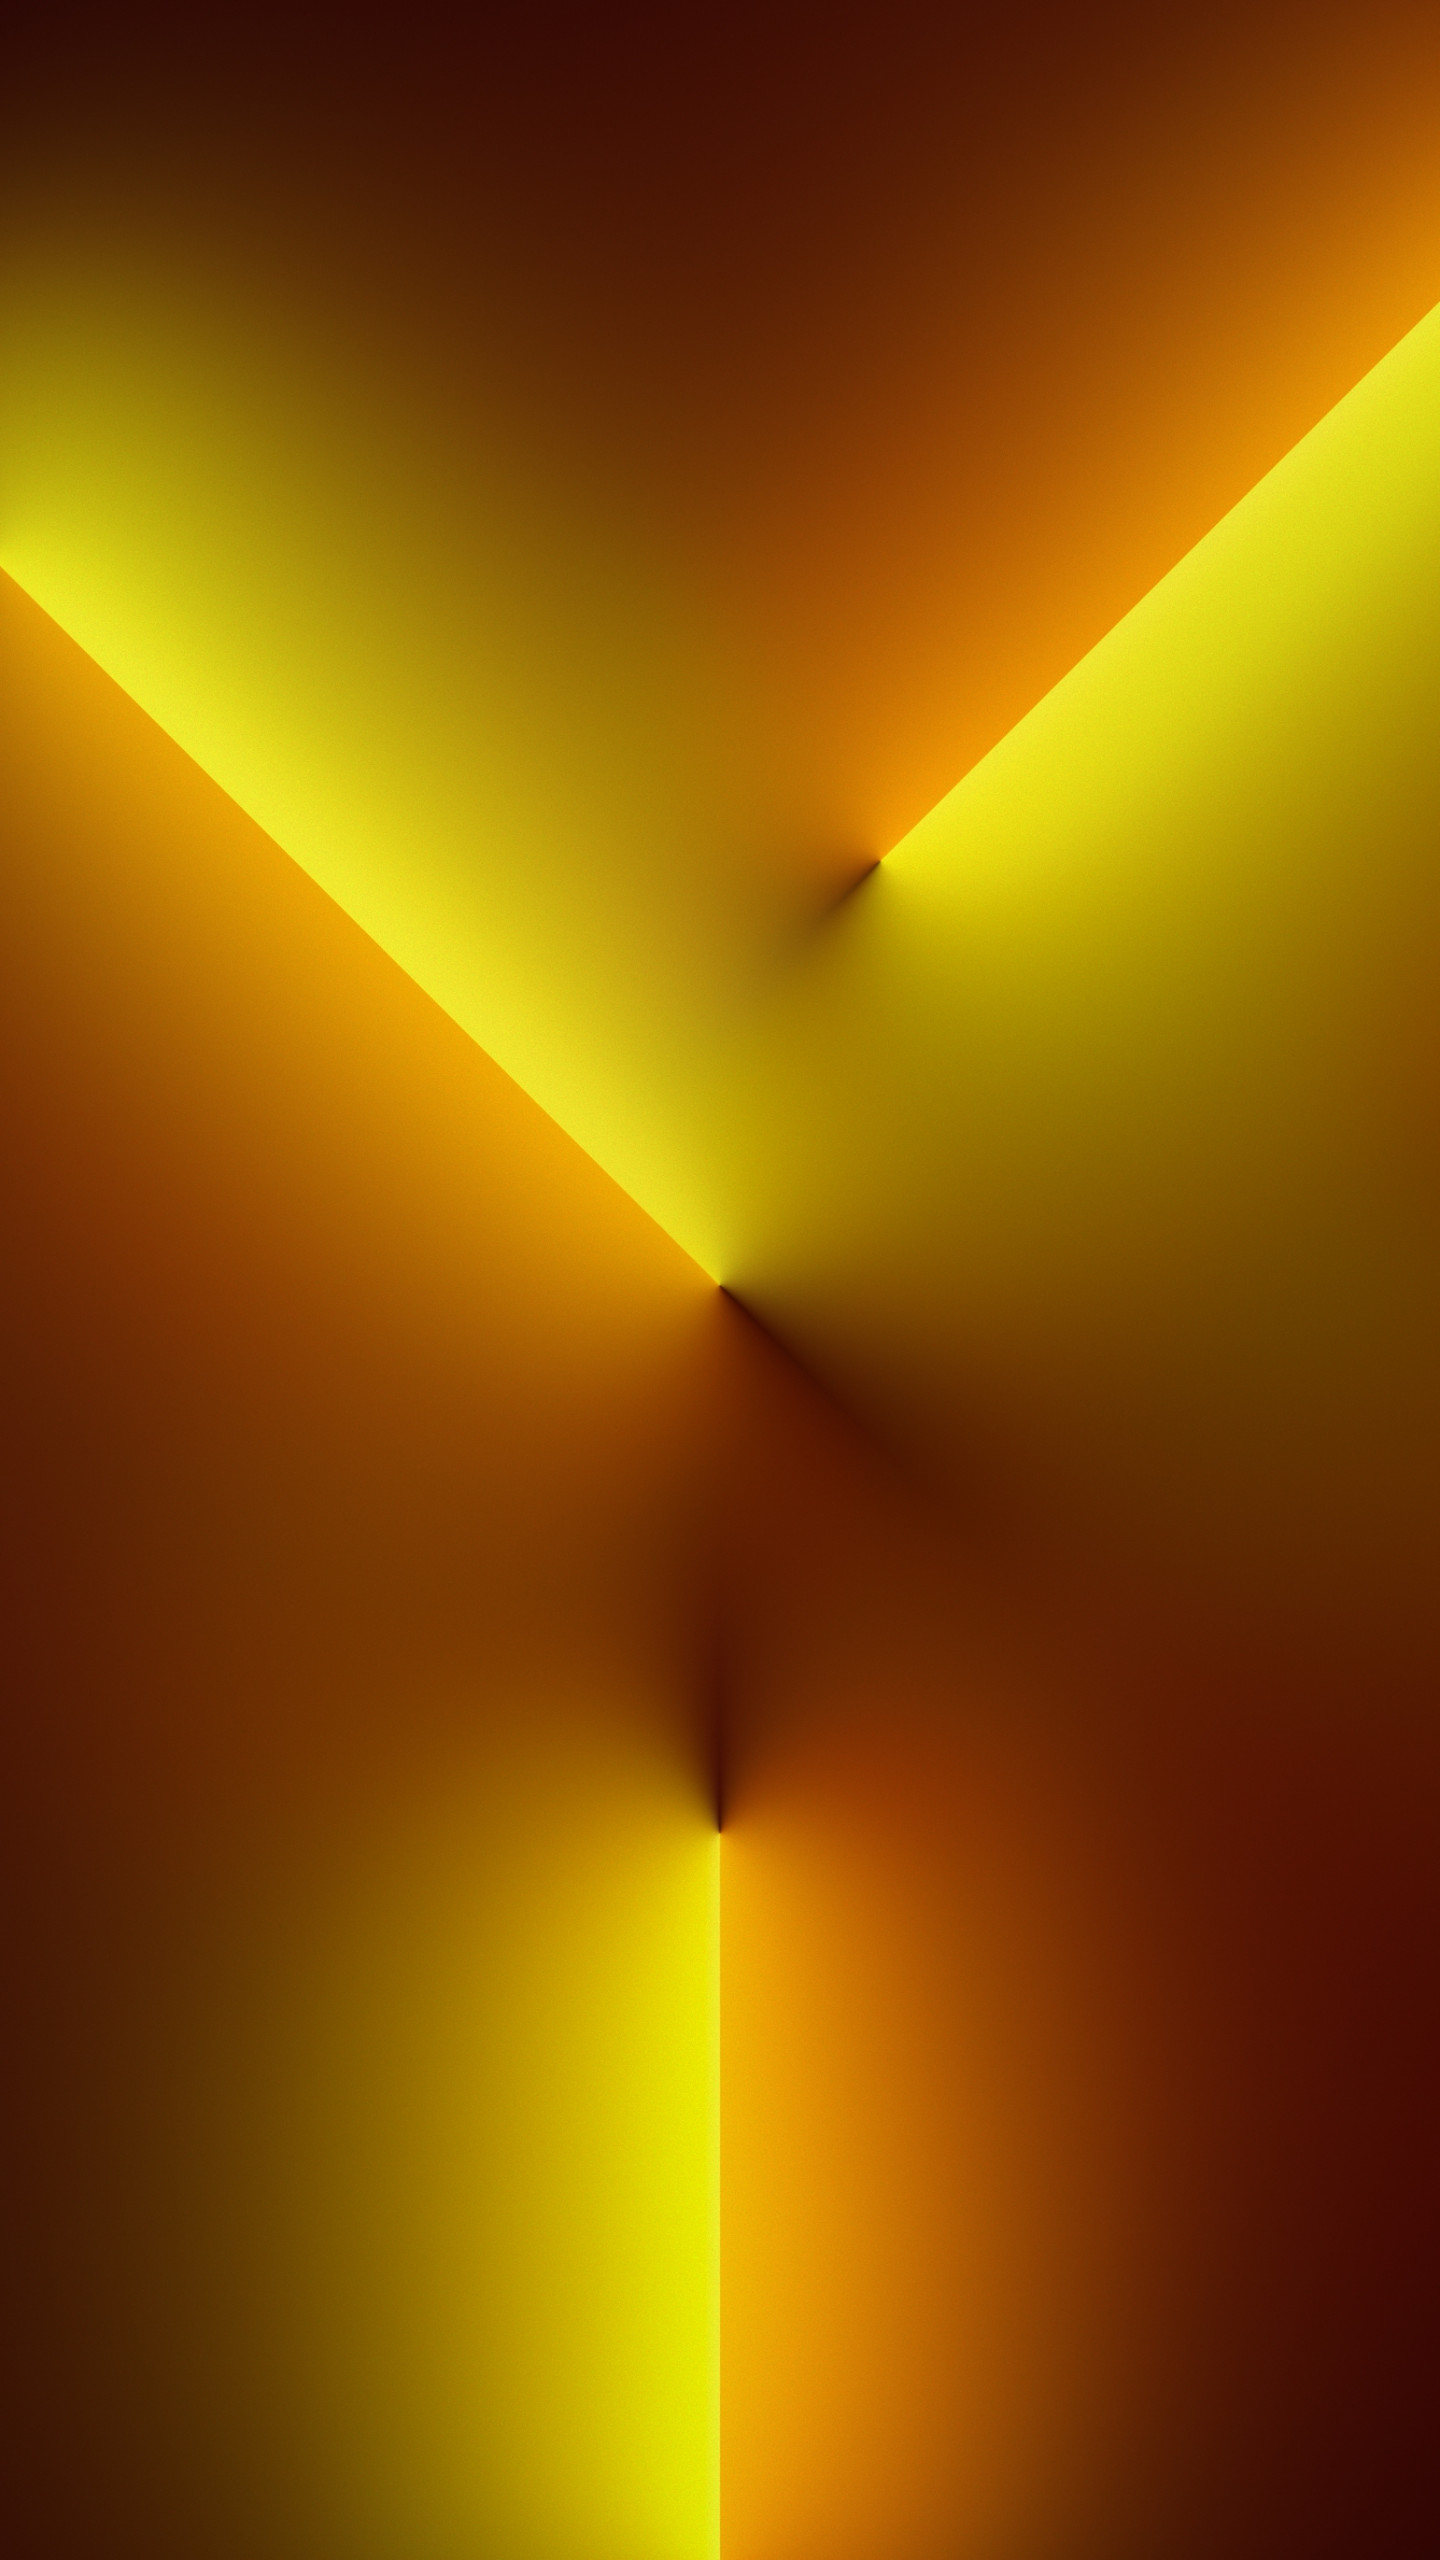 Wallpaper iPhone 13 Pro, light beams, abstract, iOS 15, Apple September  2021 Event, 4K, OS #23694